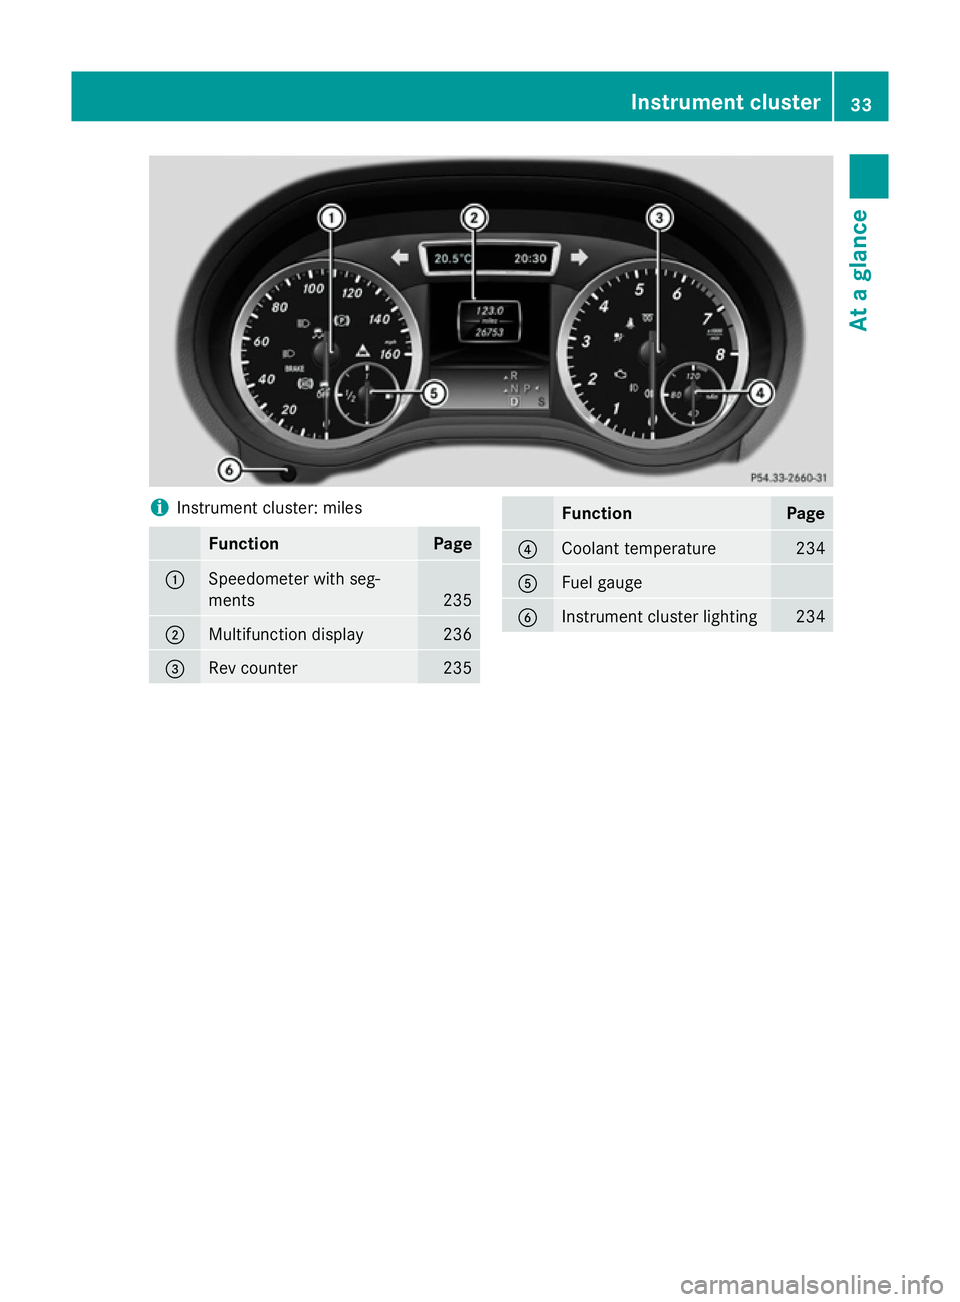 MERCEDES-BENZ GLA SUV 2013  Owners Manual i
Instrument cluster: miles Function Page
:
Speedometer with seg-
ments 235
;
Multifunction display 236
=
Rev counter 235 Function Page
?
Coolant temperature 234
A
Fuel gauge
B
Instrument cluster ligh